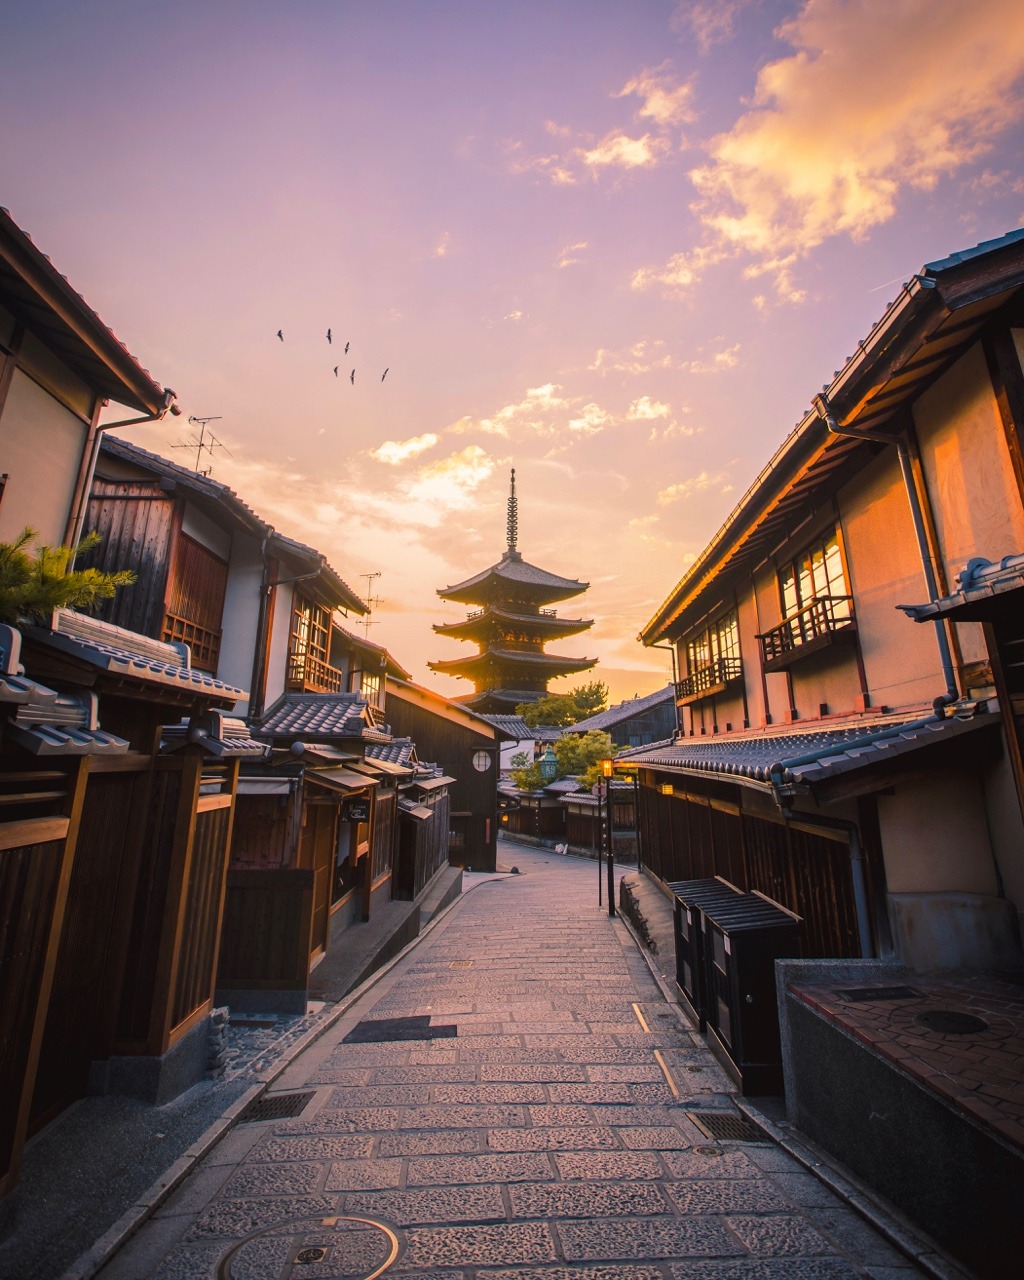 hisa-88: Throwback to the beautiful sunset of Kyoto⏳  In the world famous city